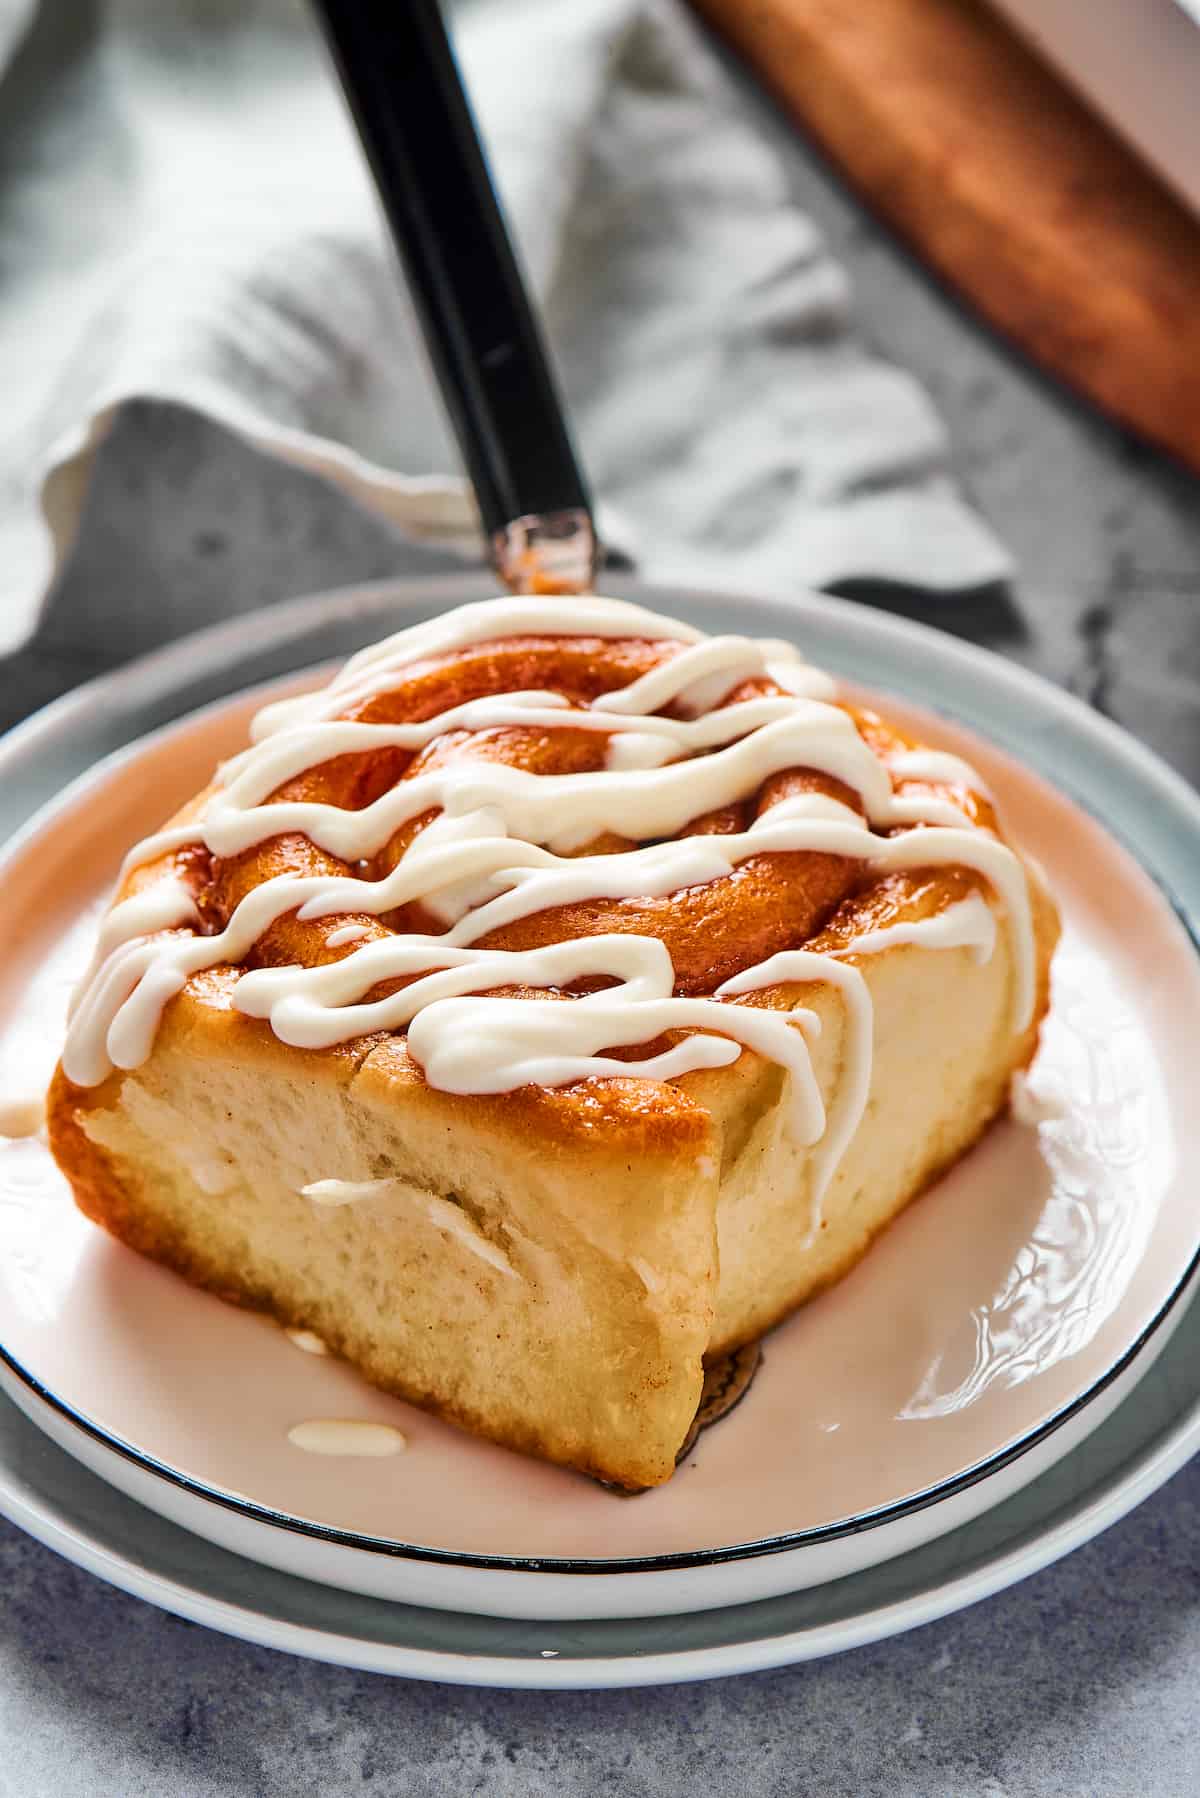 A fresh cinnamon bun on a small plate, with thick white glaze drizzled on top.